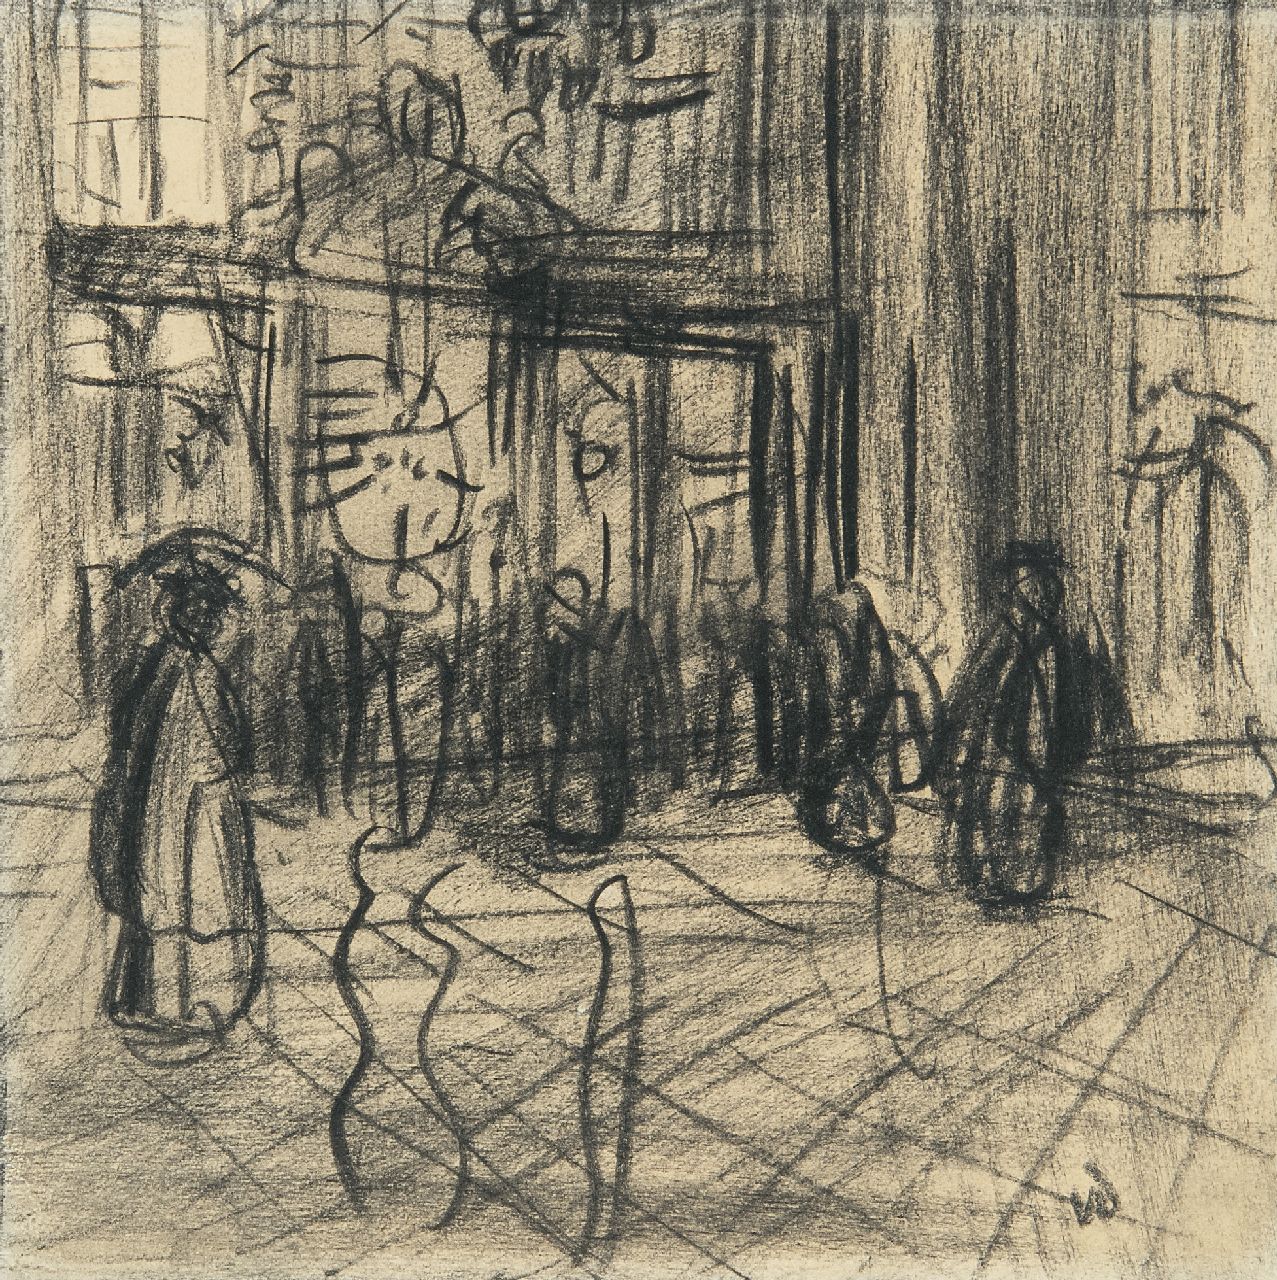 Dongen C.T.M. van | Cornelis Theodorus Maria 'Kees' van Dongen | Watercolours and drawings offered for sale | Figures in a shopping street, charcoal on paper 12.4 x 12.4 cm, signed l.r. with initials